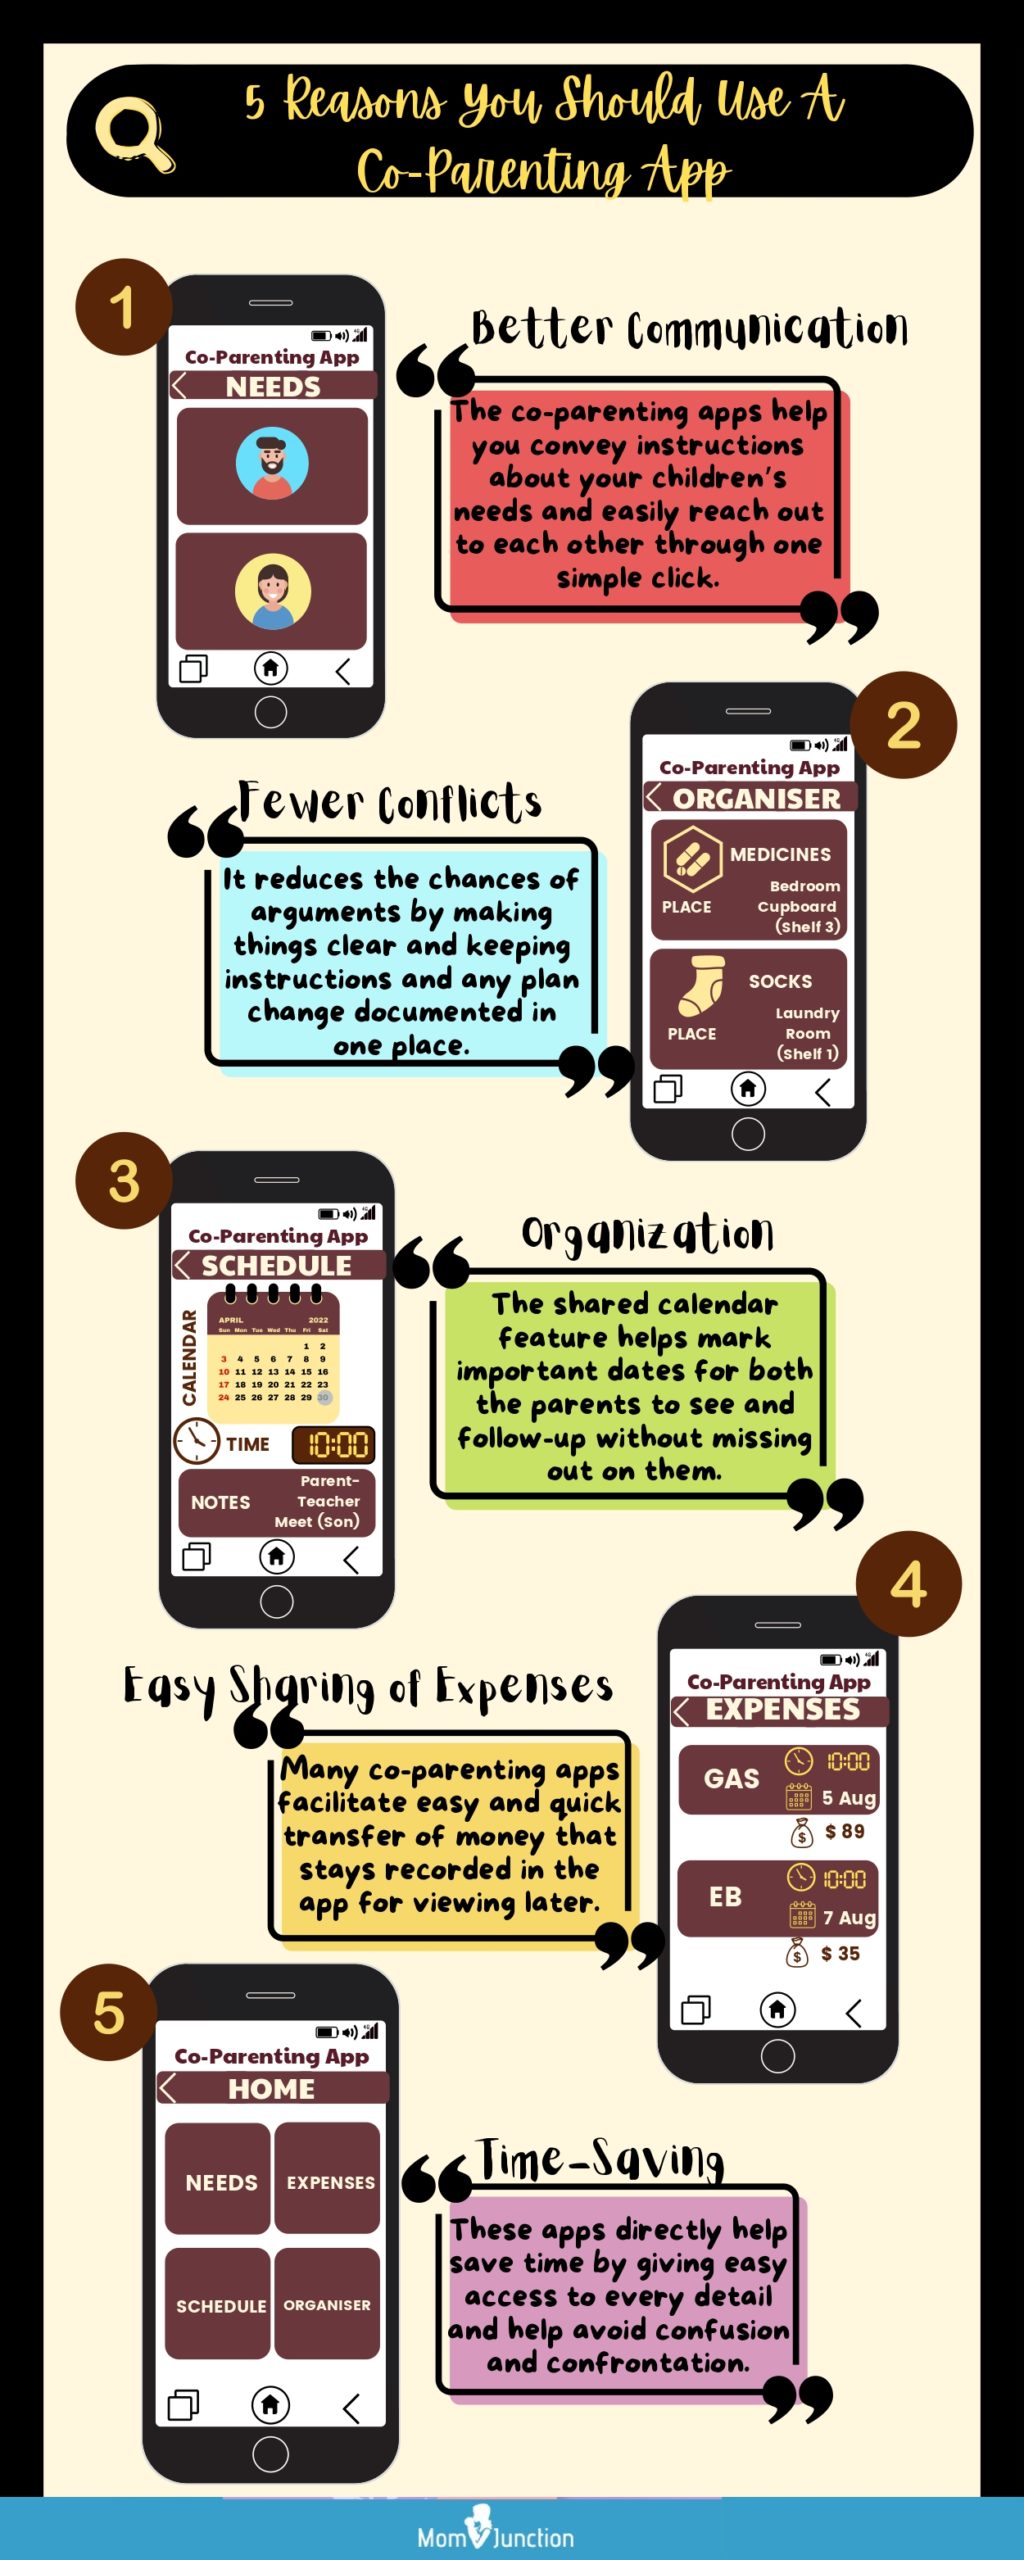 reasons to use co-parenting app (infographic)